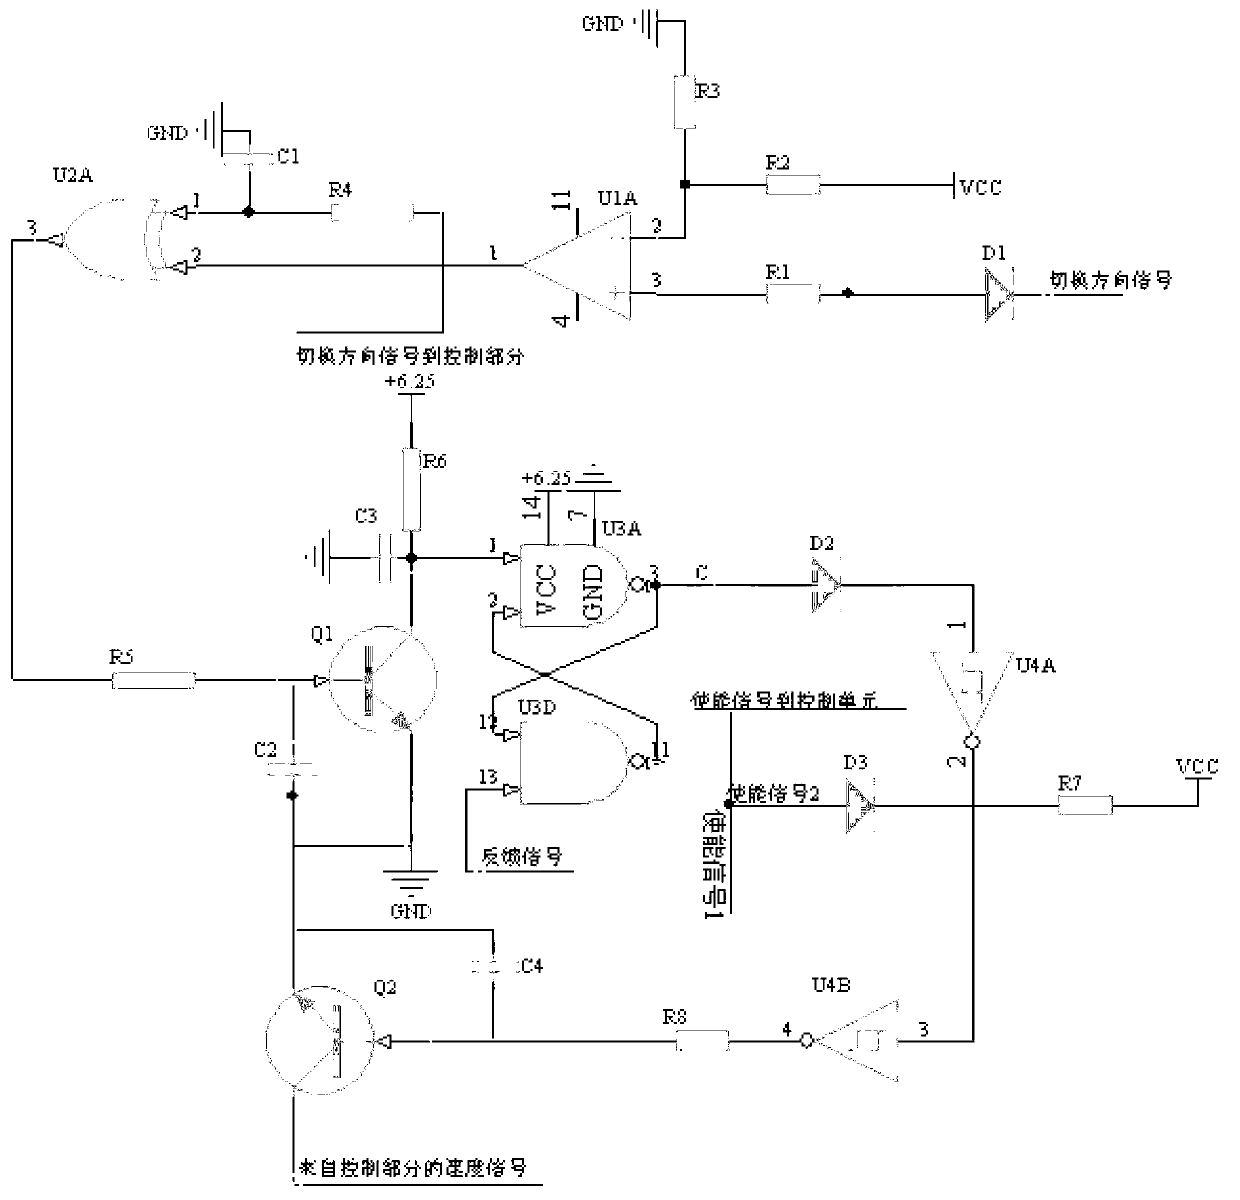 Motor drive controller with delay protection